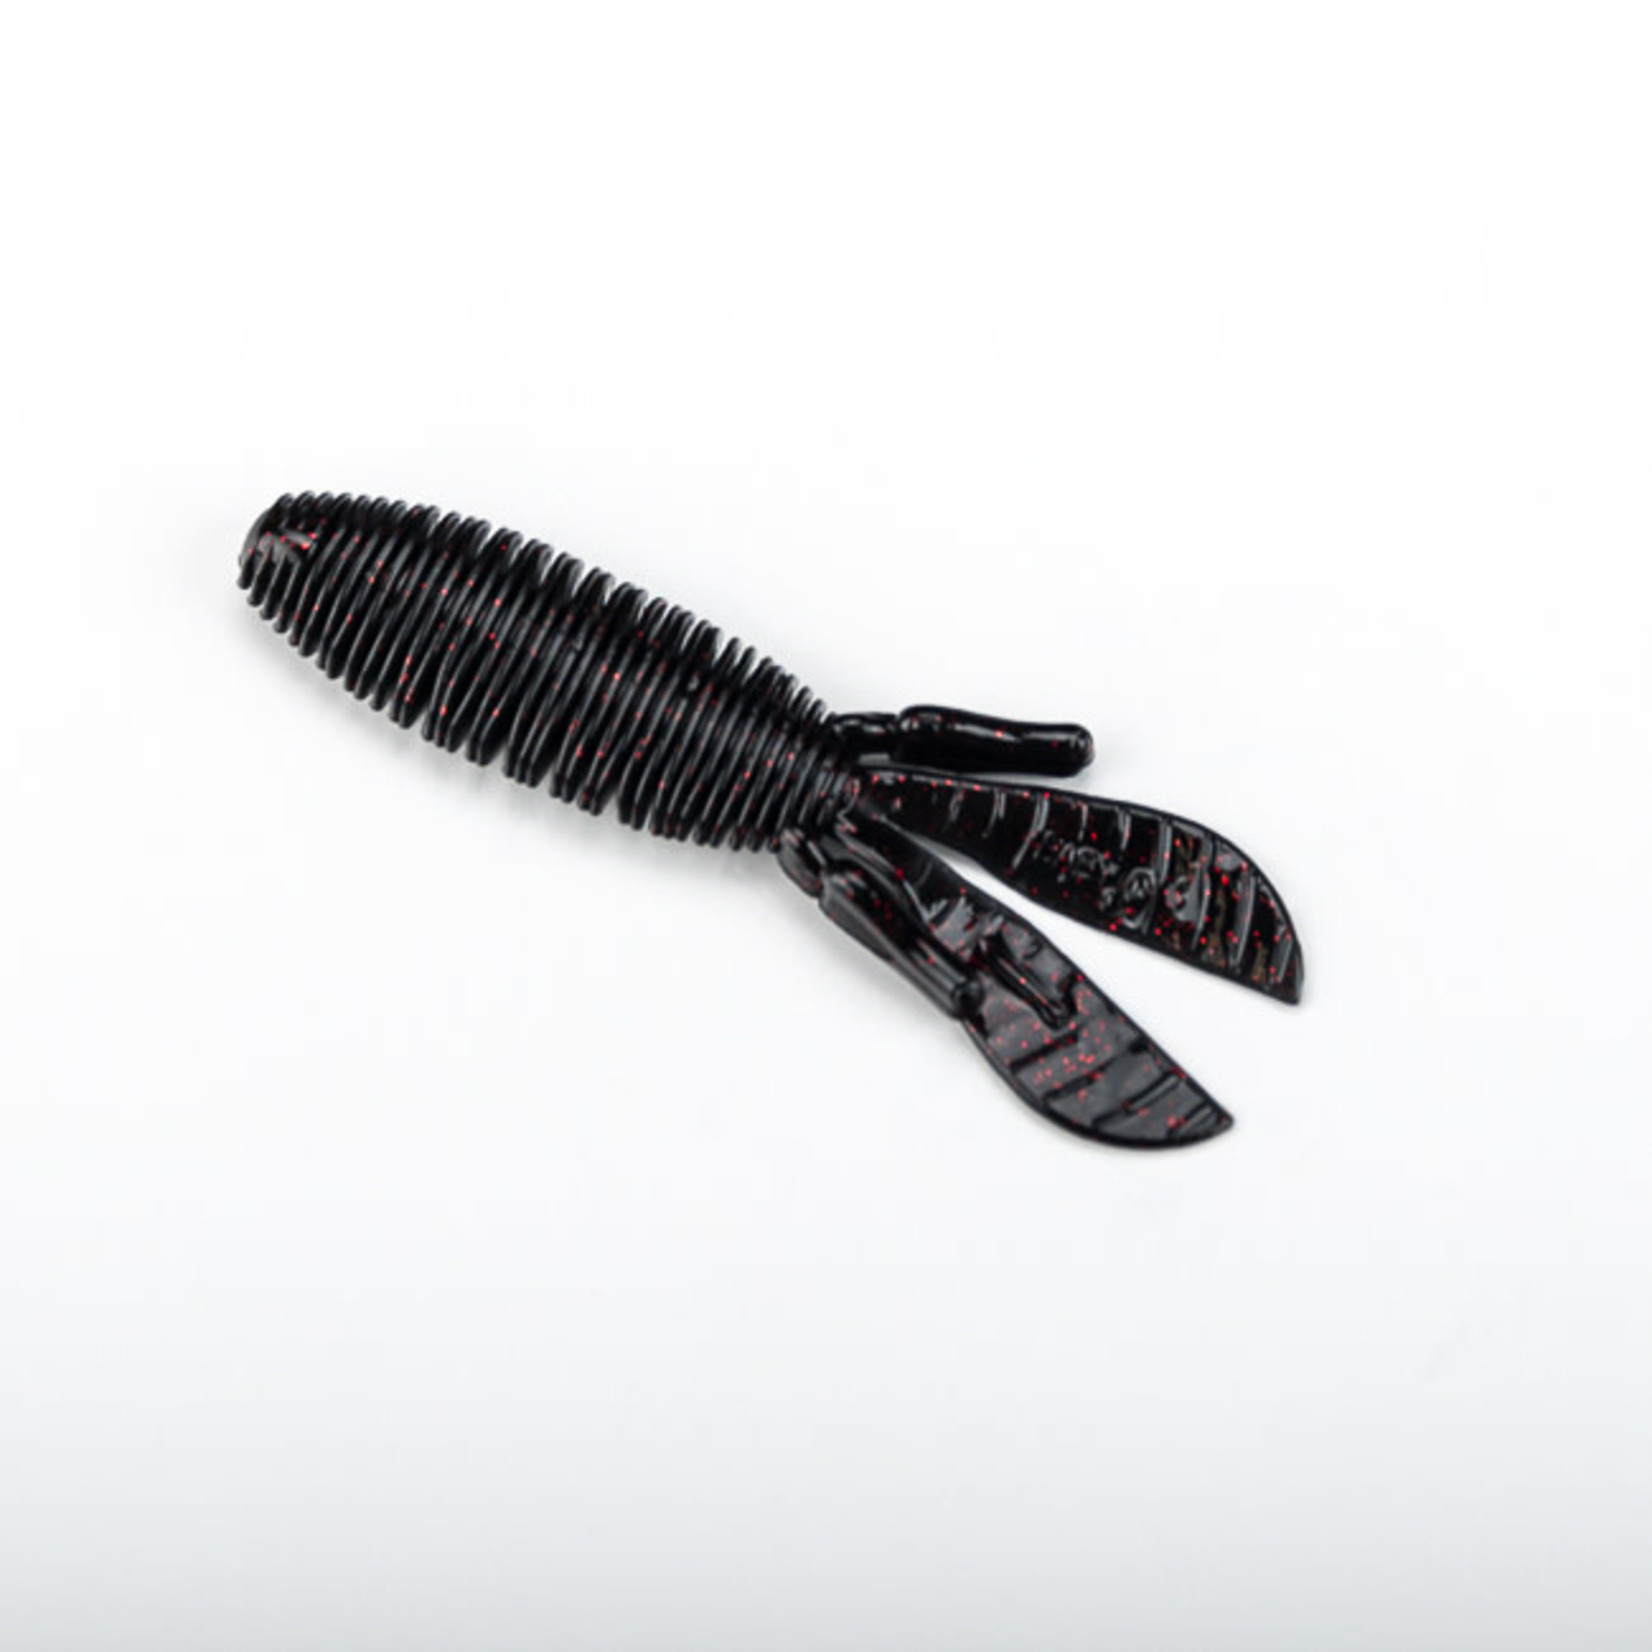 Missile Baits Missile Baits MBBD365-BLKR Baby D Bomb Creature Bait, 3.65", Black Red Flake